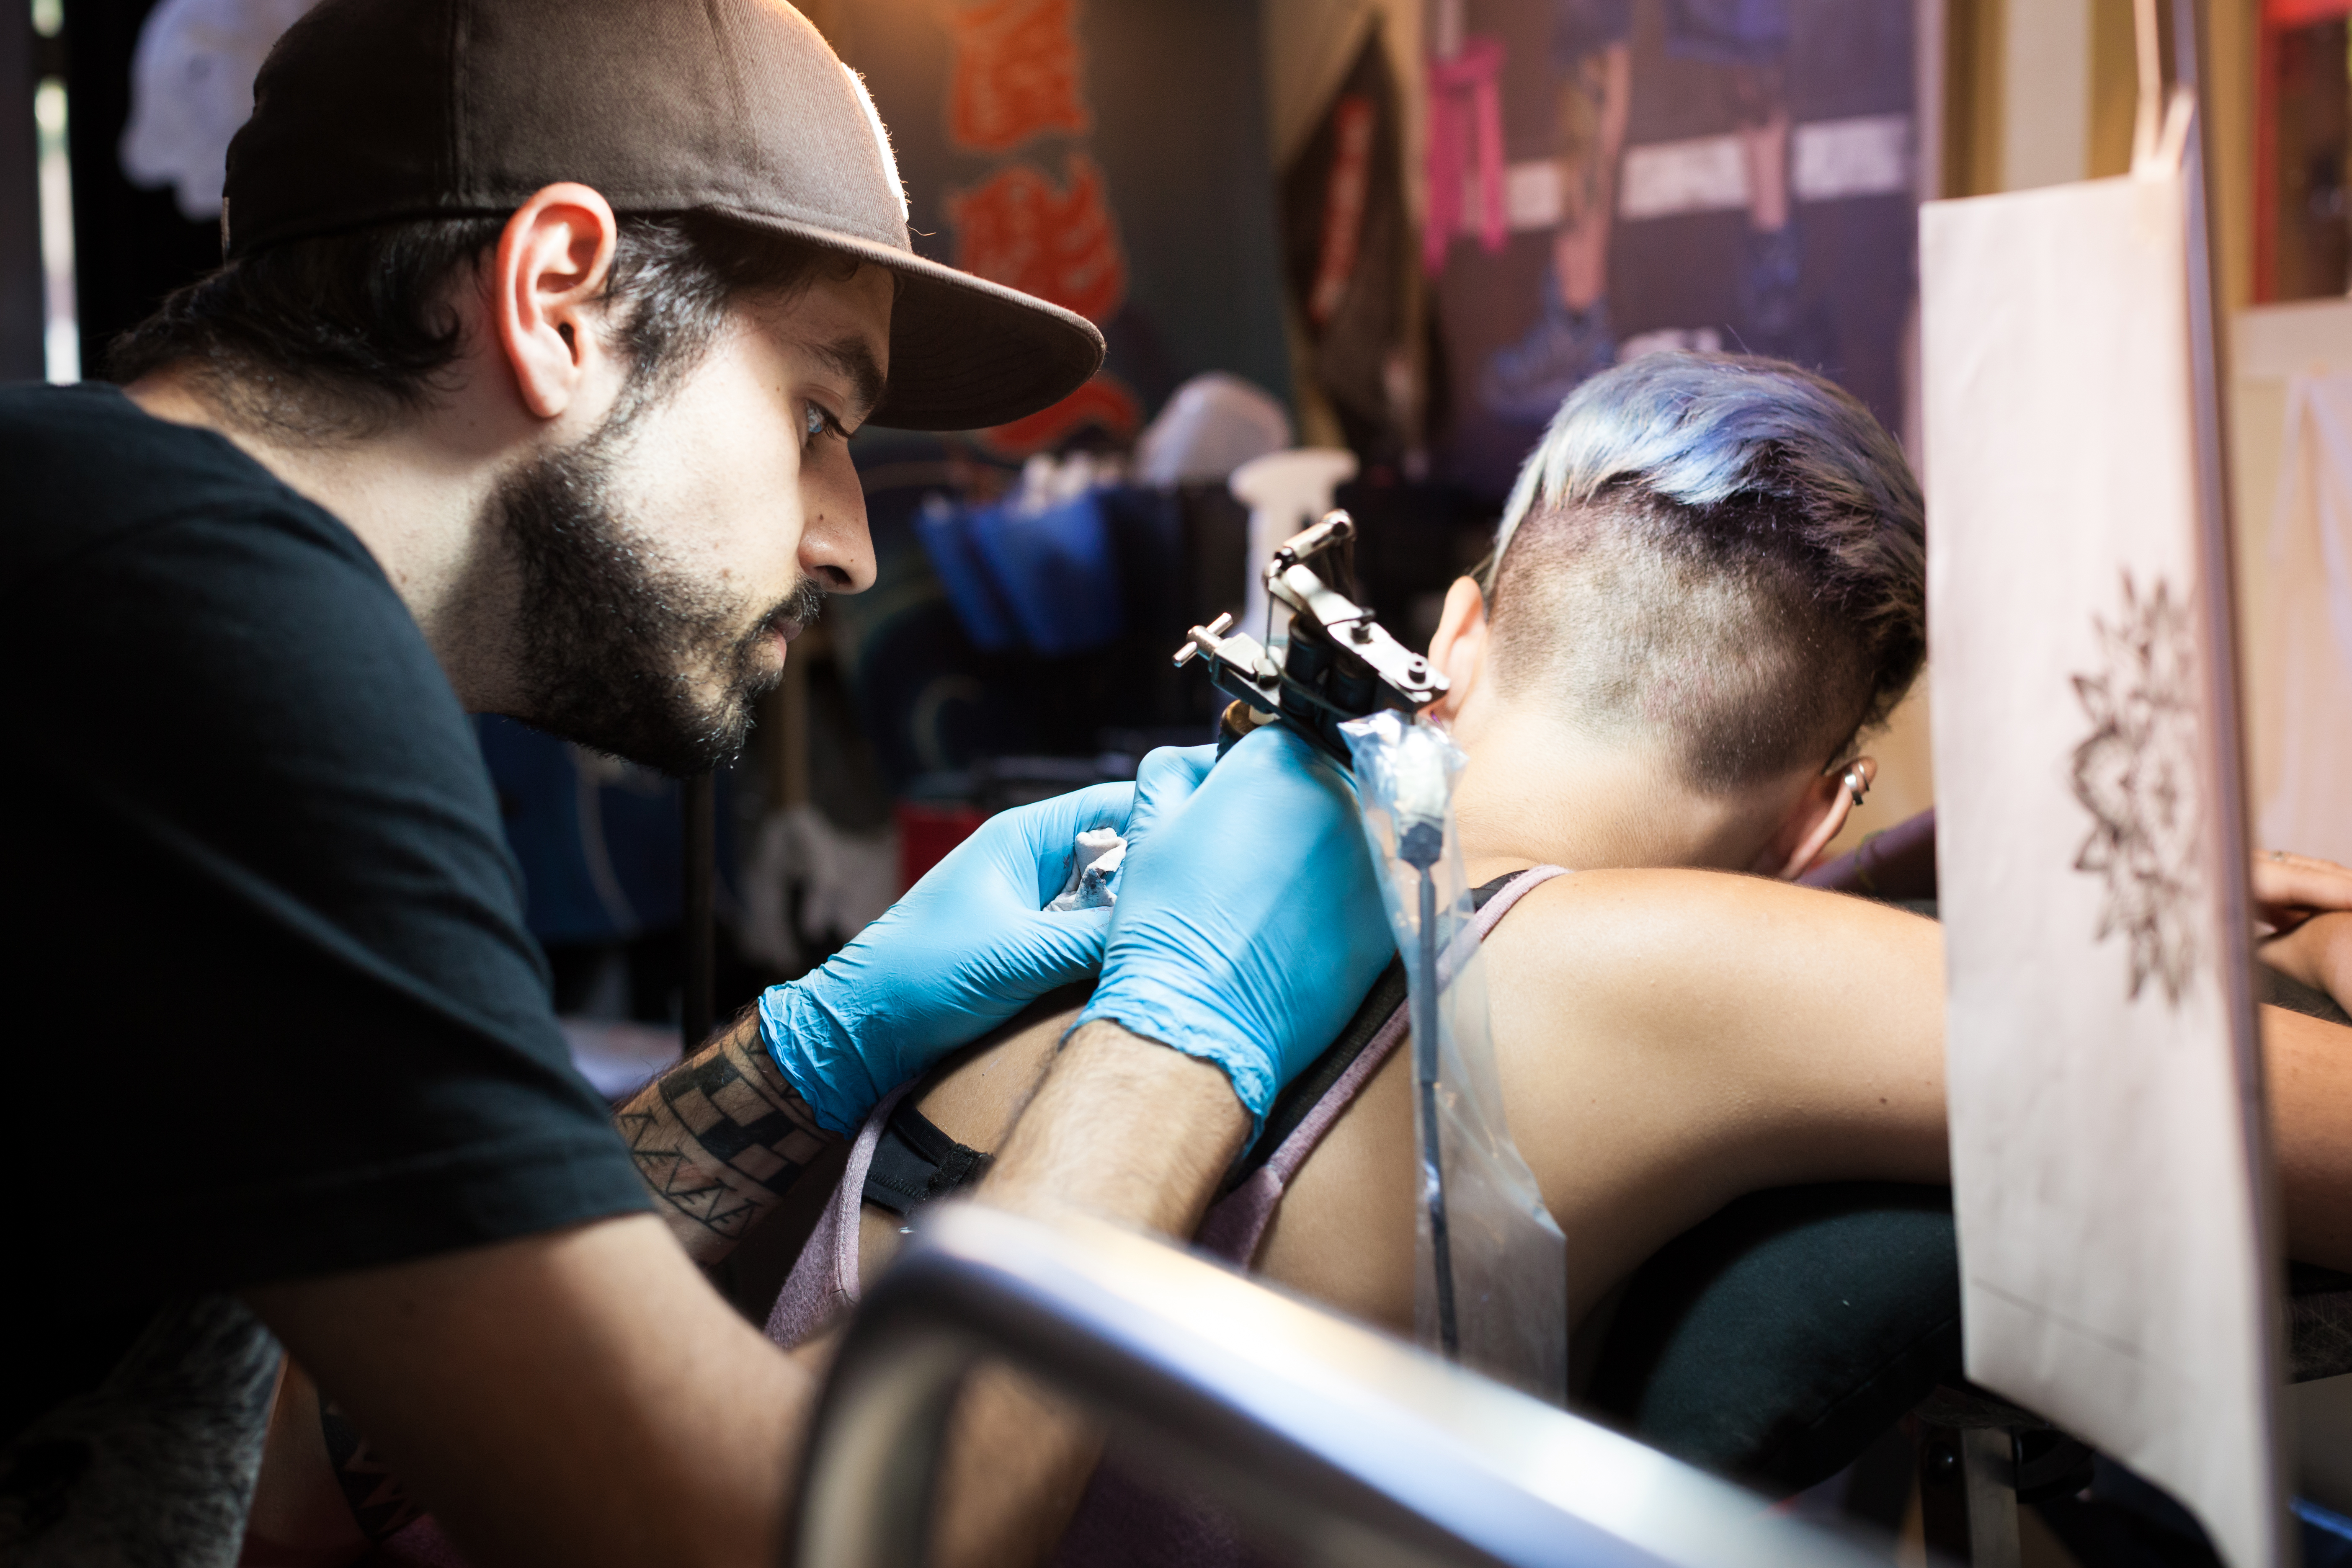 Friday the 13th tattoo discounts bring big crowds to Houston parlors   ABC13 Houston